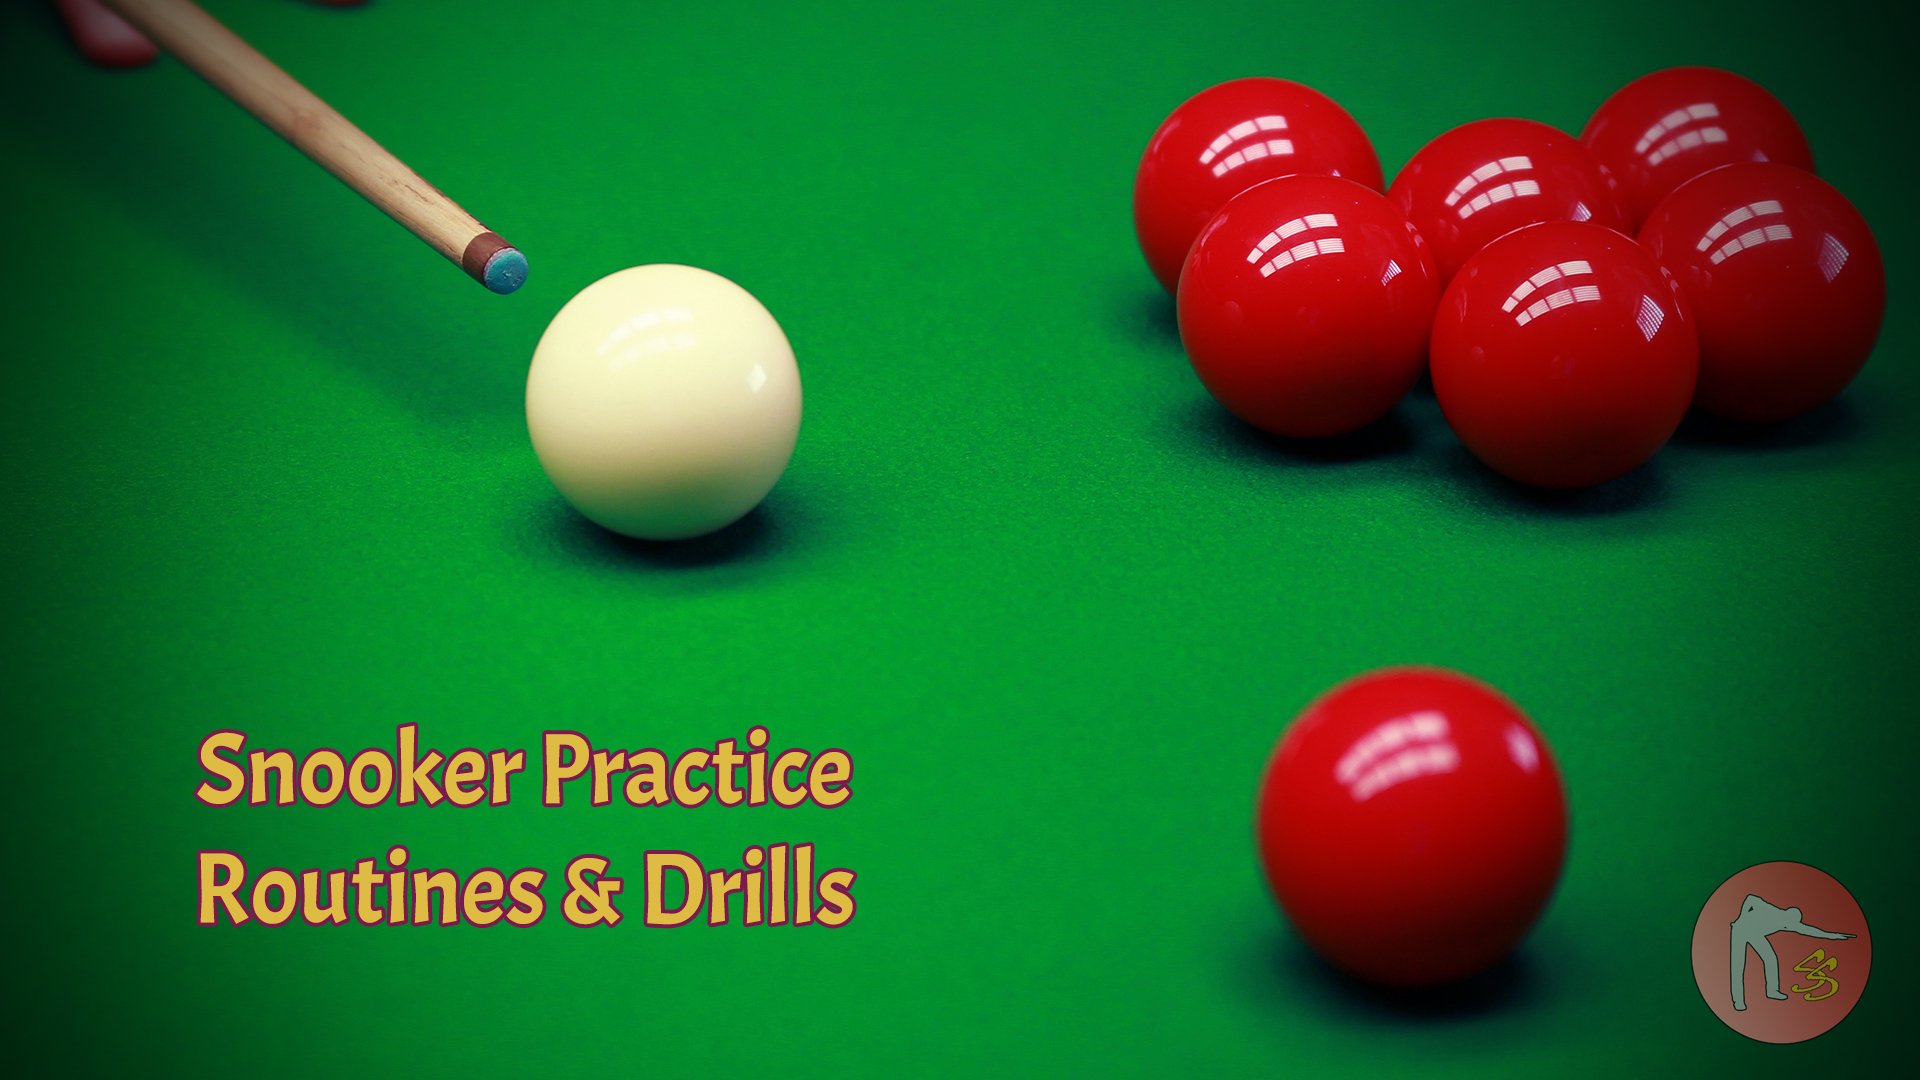 Pro Safety Shot Examples - Billiards and Pool Principles, Techniques,  Resources